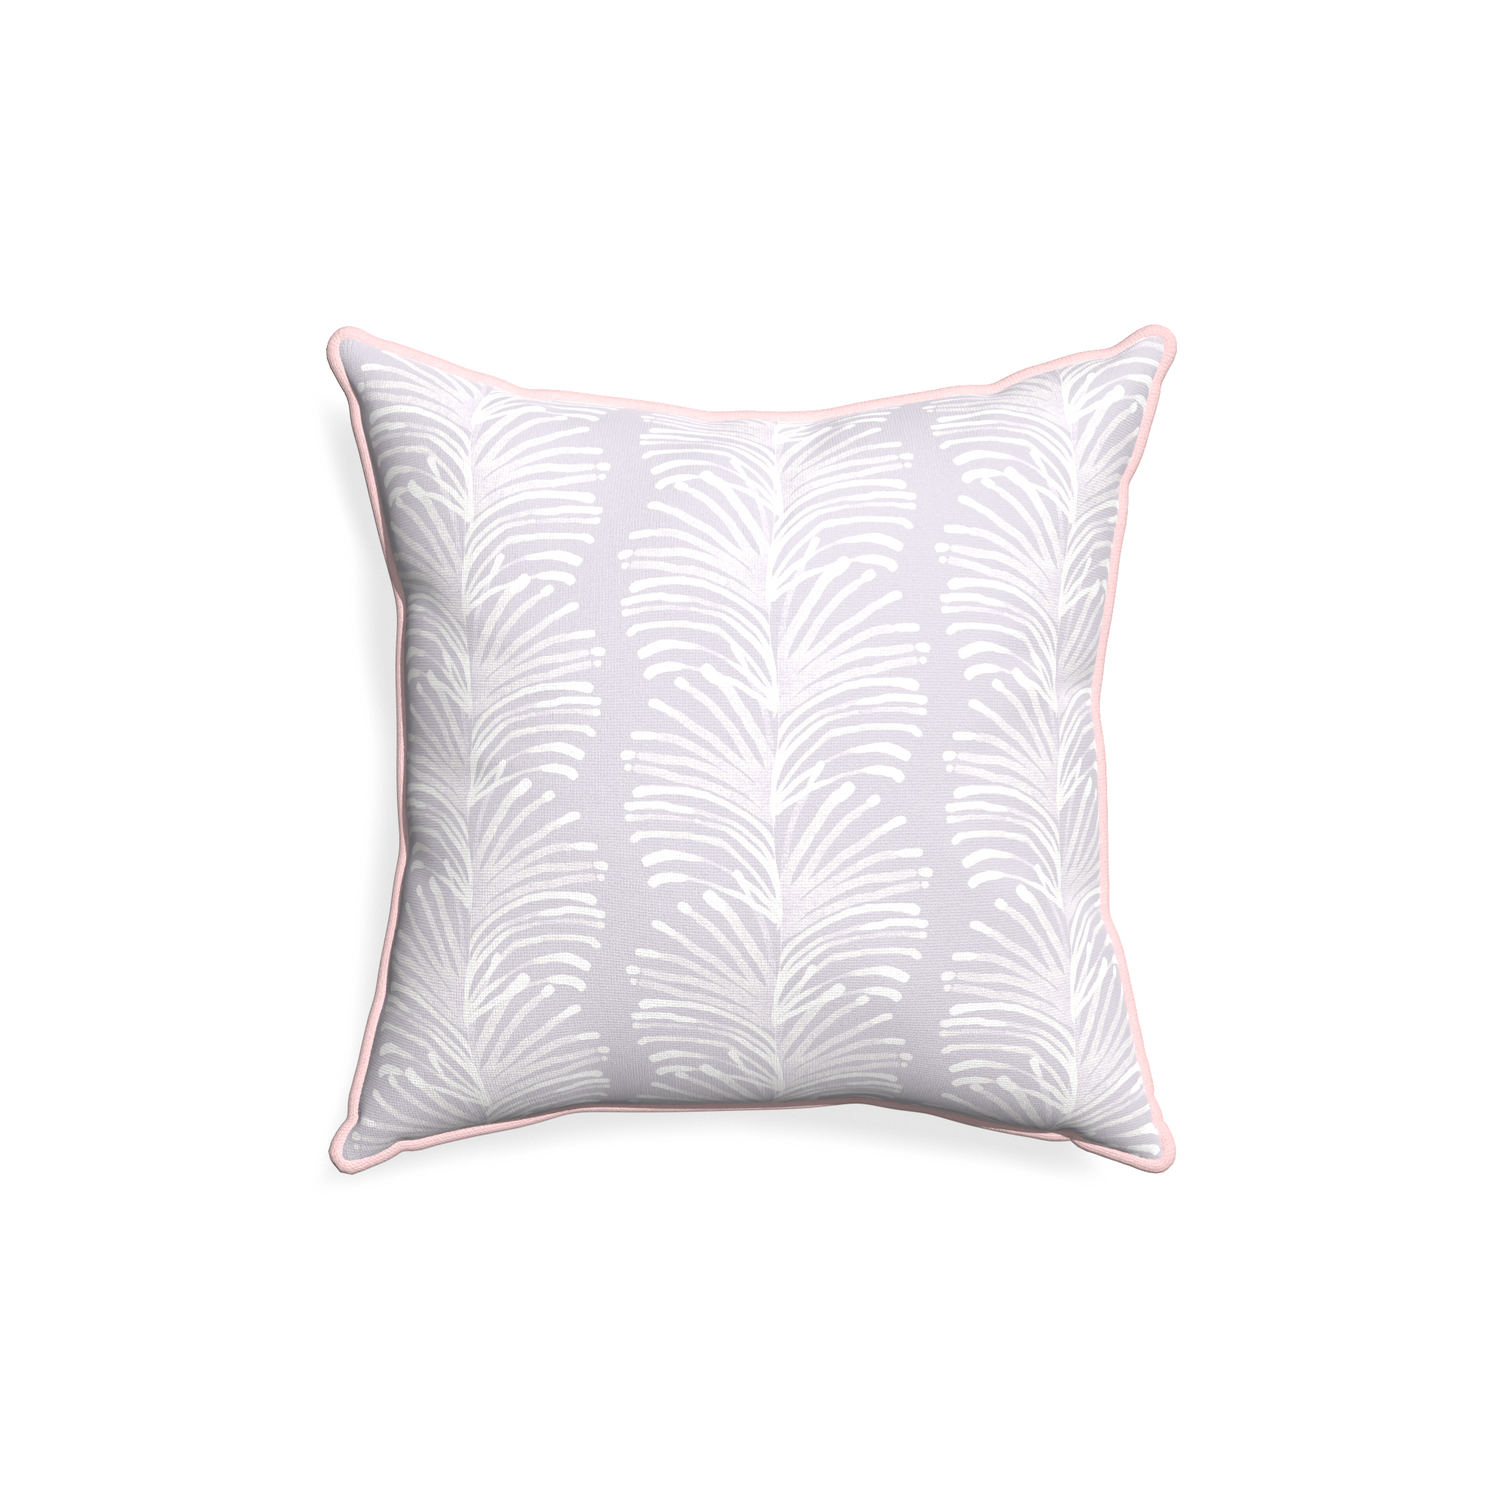 18-square emma lavender custom lavender botanical stripepillow with petal piping on white background